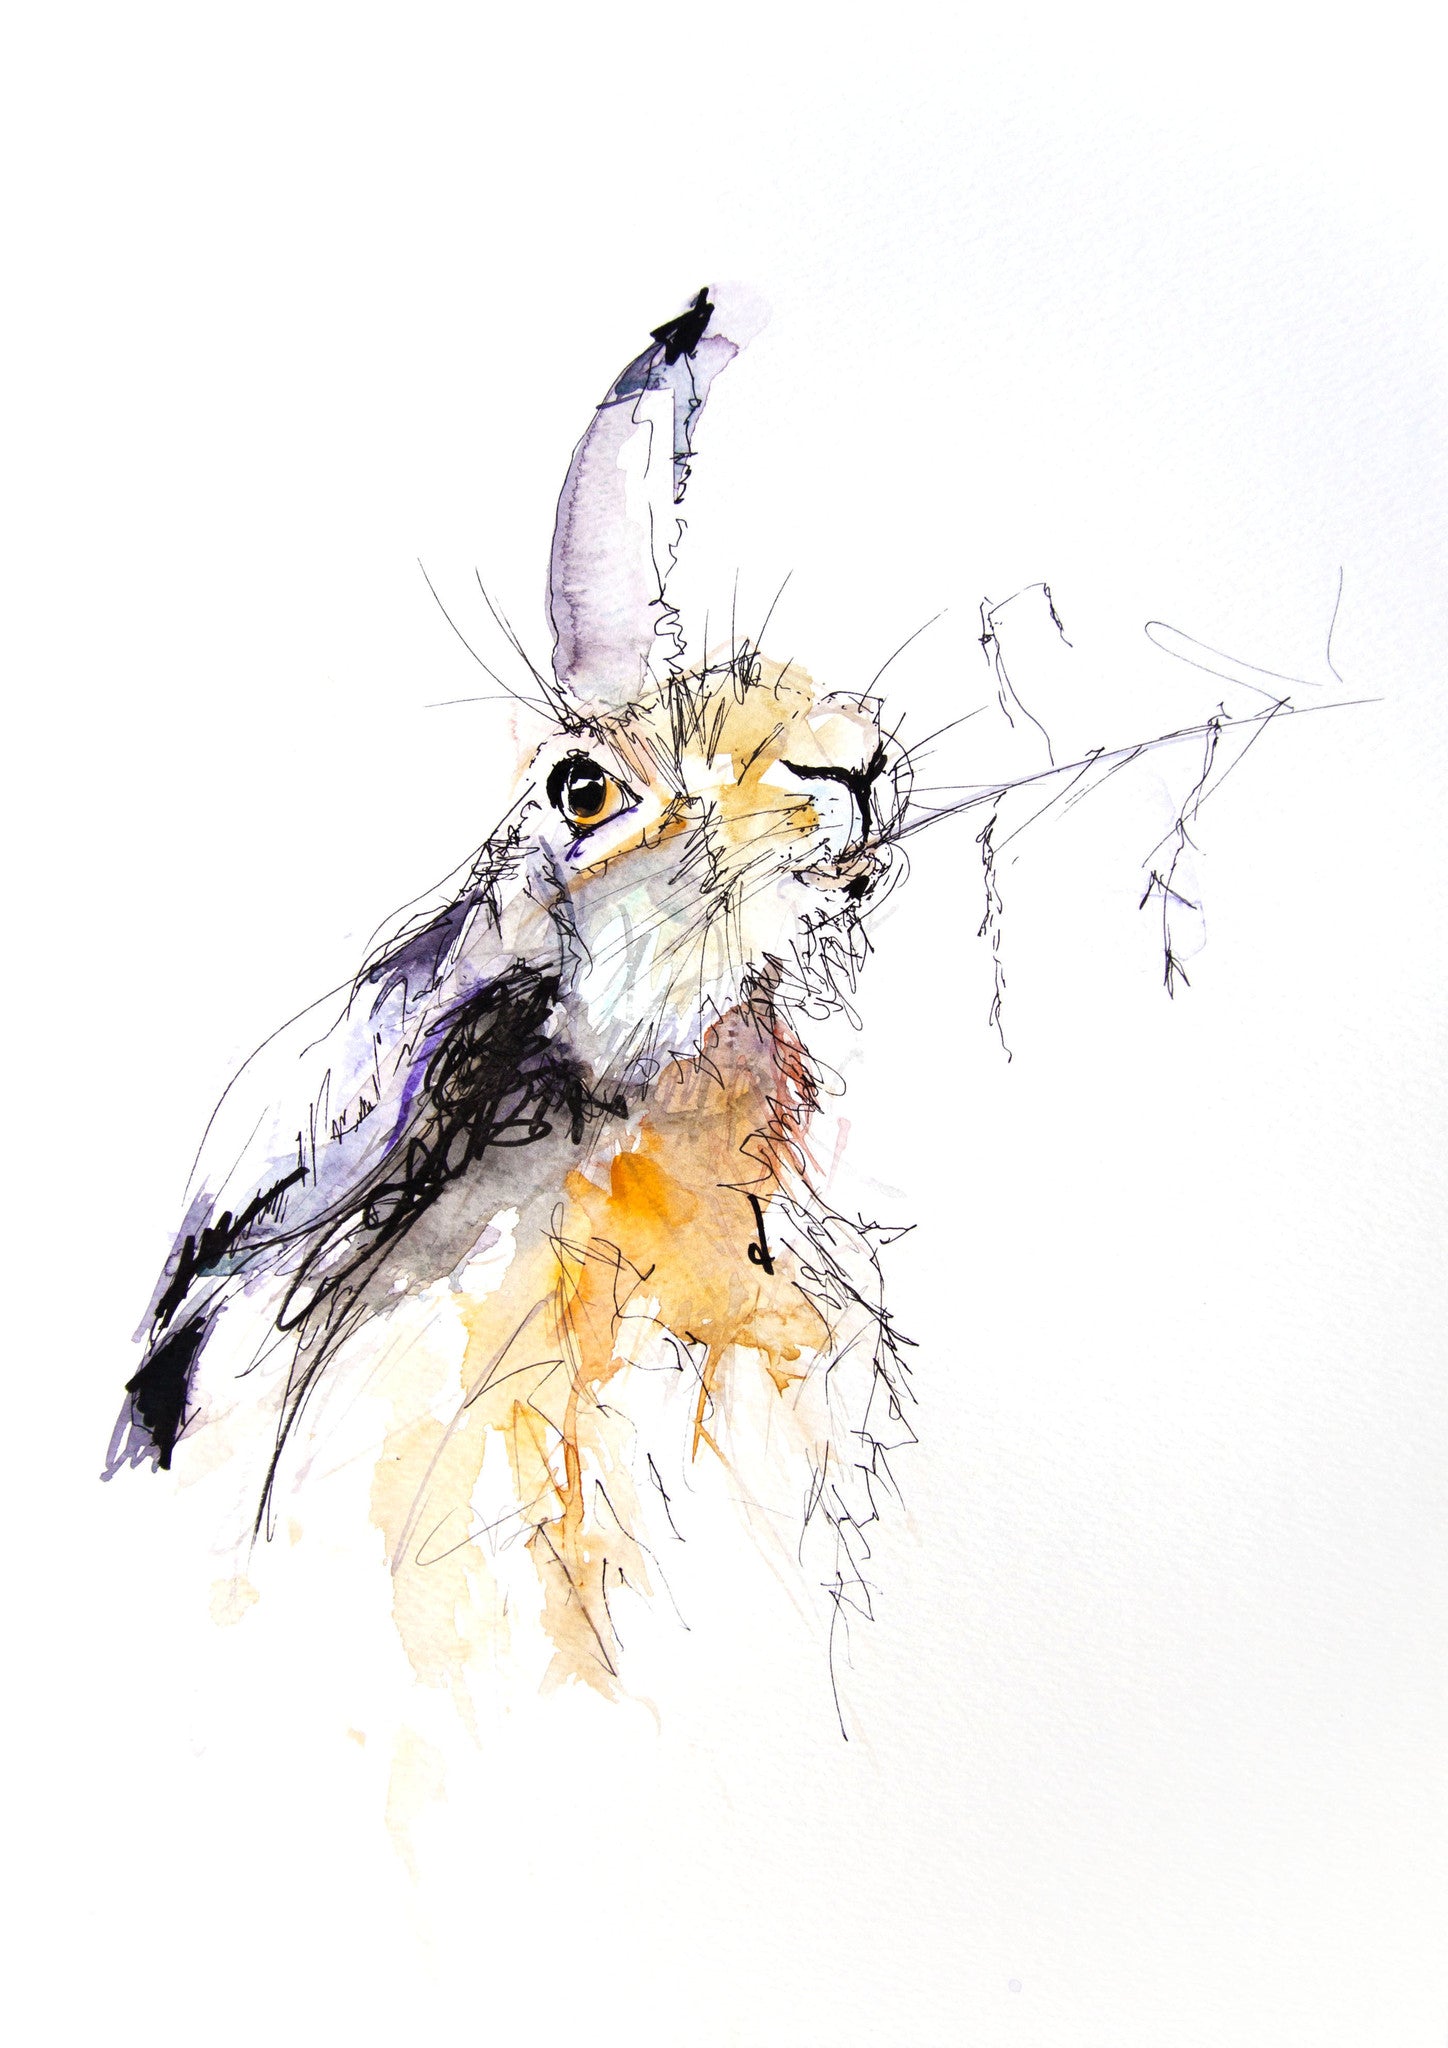 JEN BUCKLEY signed LIMITED EDITION PRINT of my original HARE watercolour  - Jen Buckley Art limited edition animal art prints